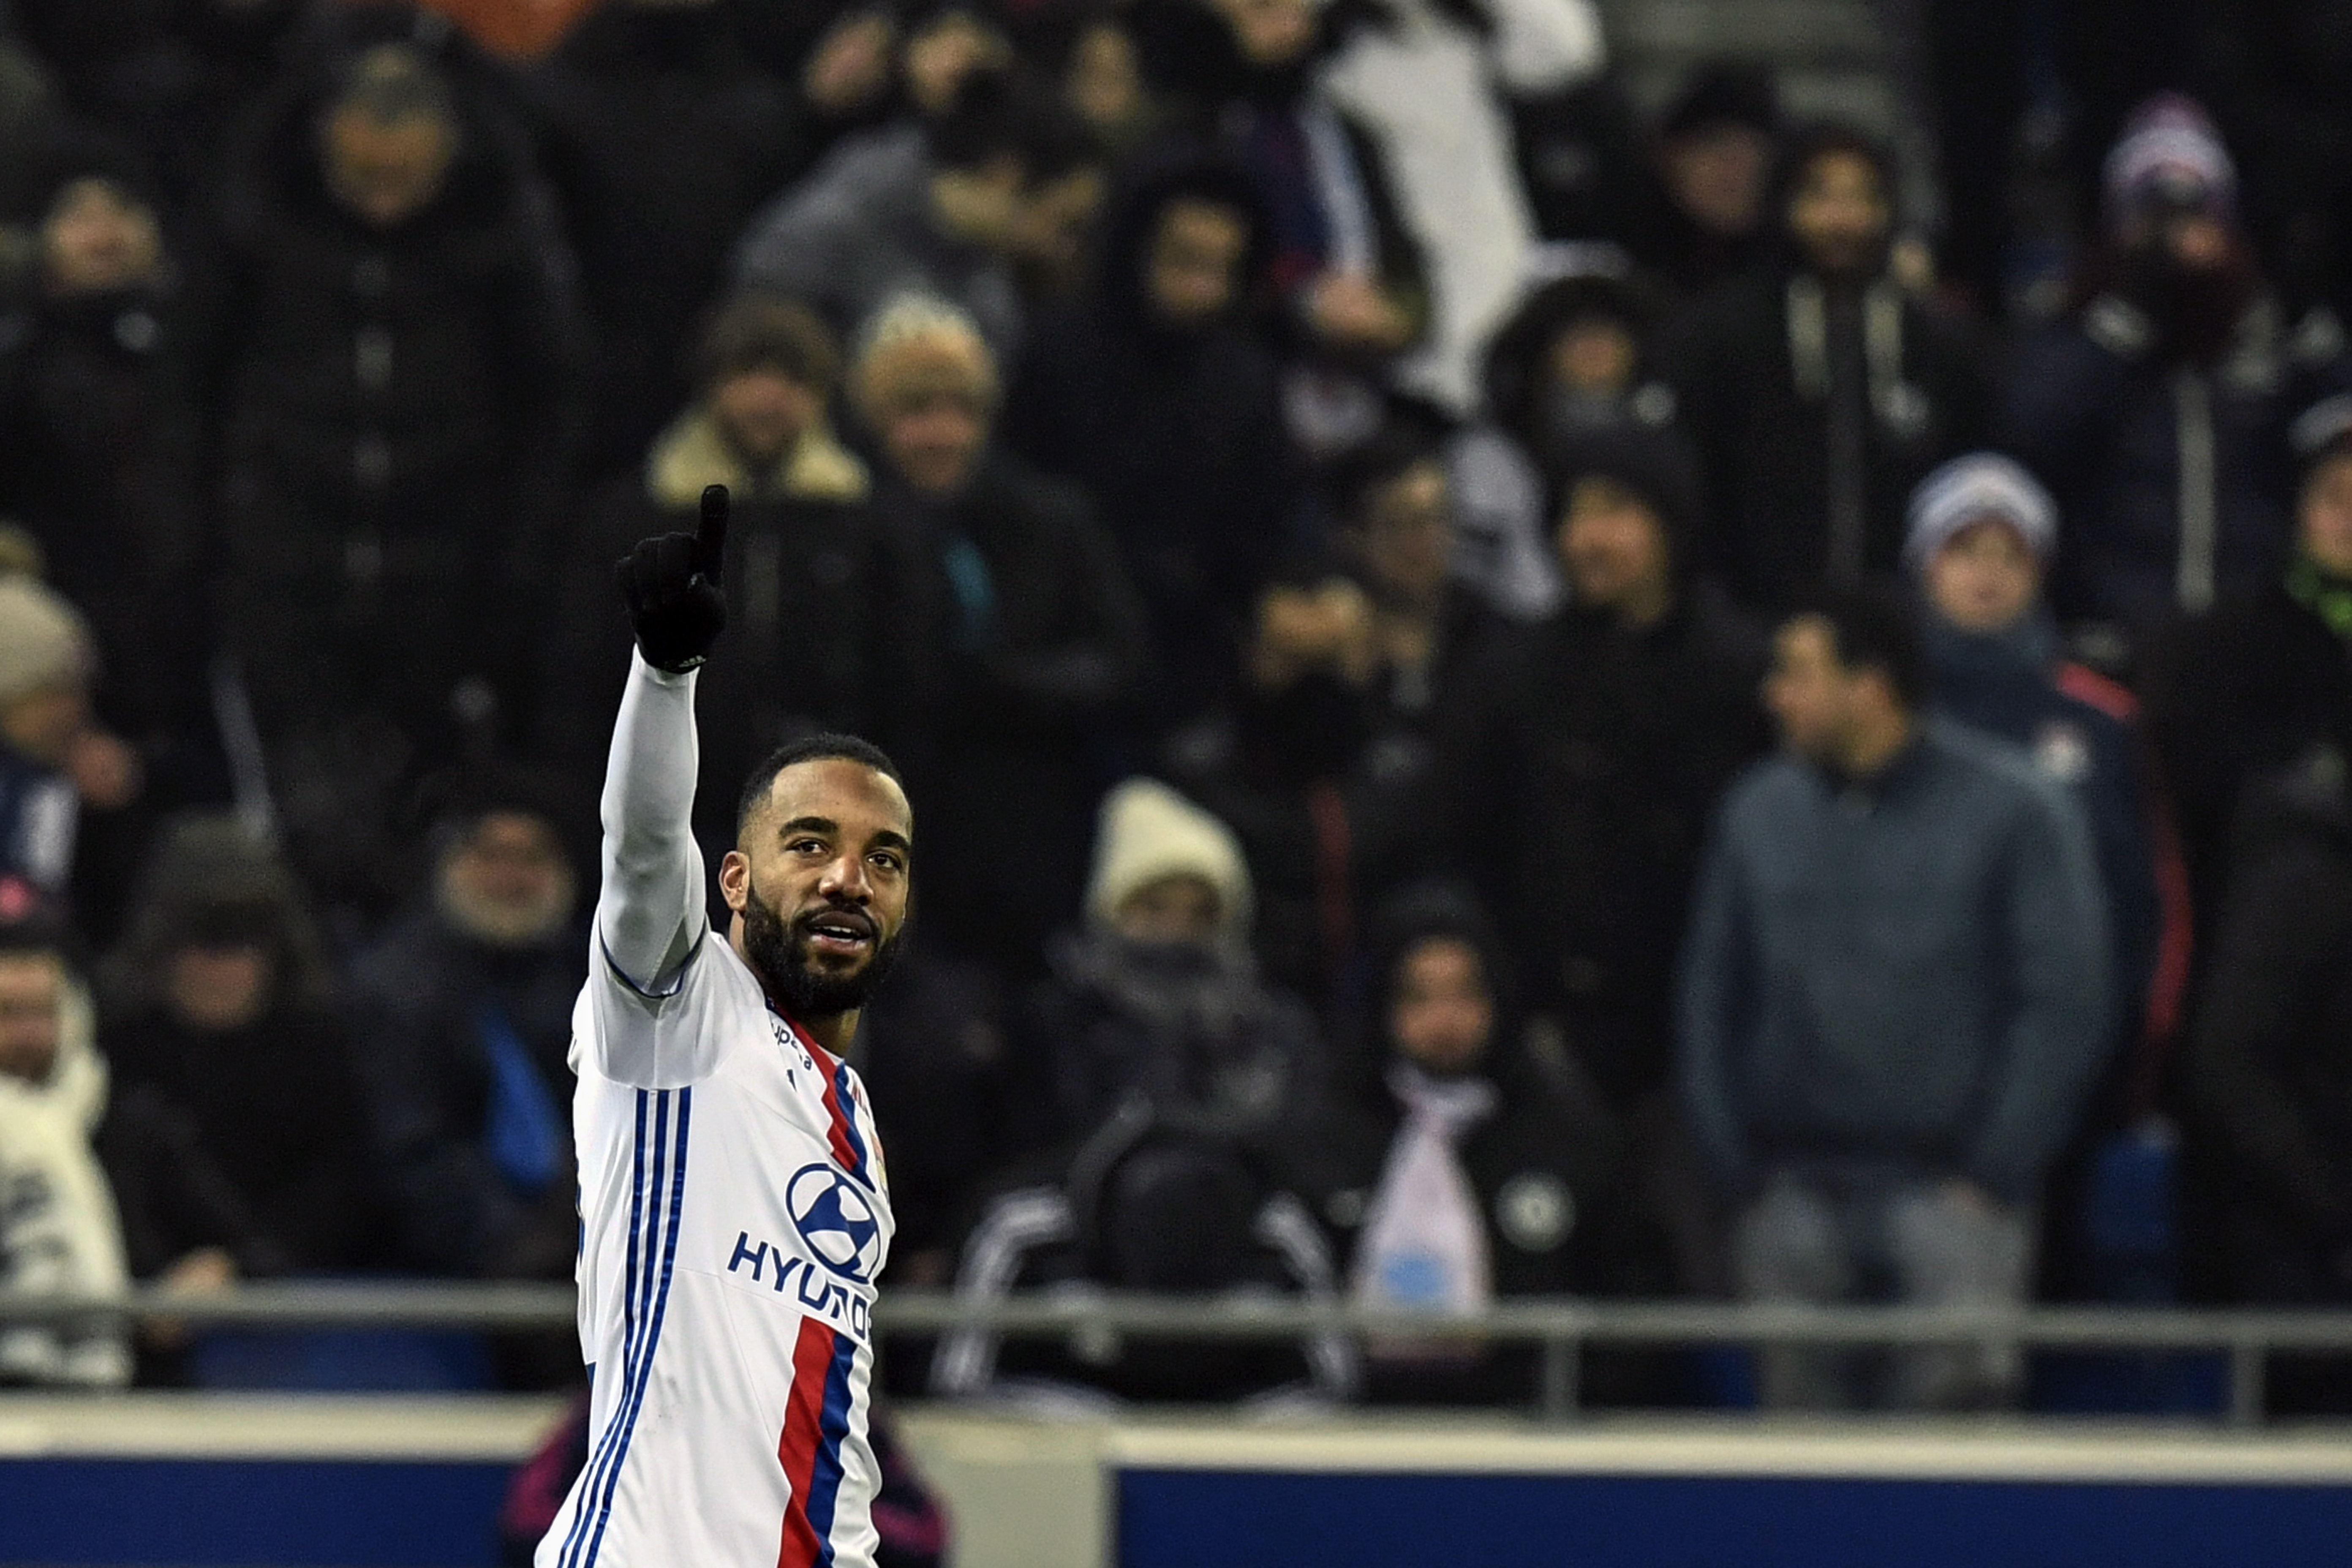 Lyon's French forward Alexandre Lacazette celebrates after scoring a goal during the French L1 football match Olympique Lyonnais (OL) vs Marseille (OM) on January 22, 2017, at the Parc Olympique Lyonnais stadium in Decines-Charpieu, central-eastern France.  / AFP / JEFF PACHOUD        (Photo credit should read JEFF PACHOUD/AFP/Getty Images)